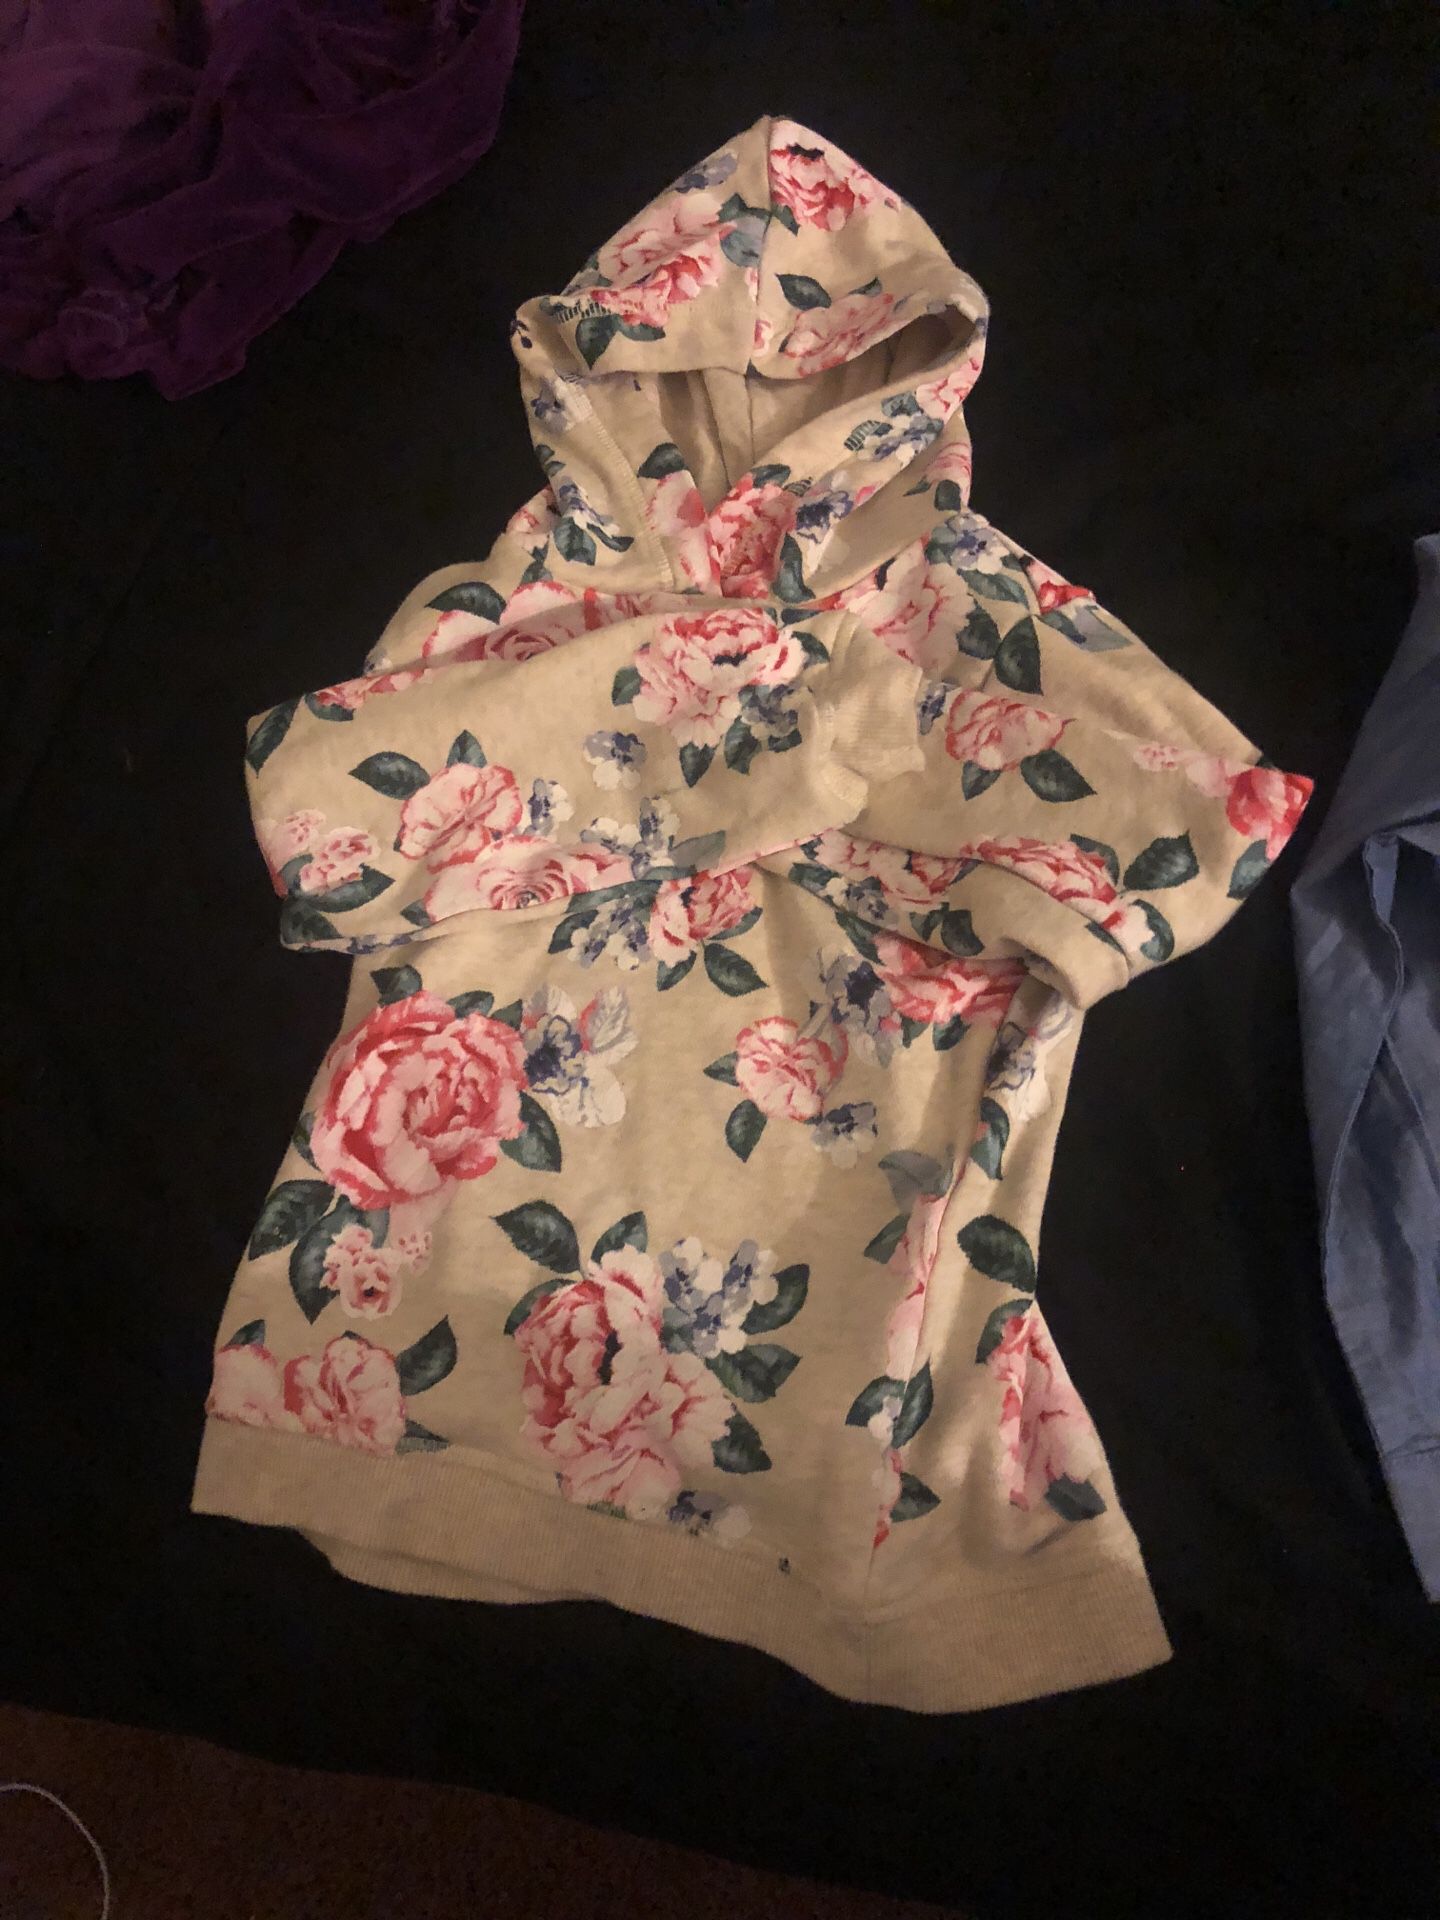 Flower sweatshirt, lime green adidas shoes and girls dress all for $30